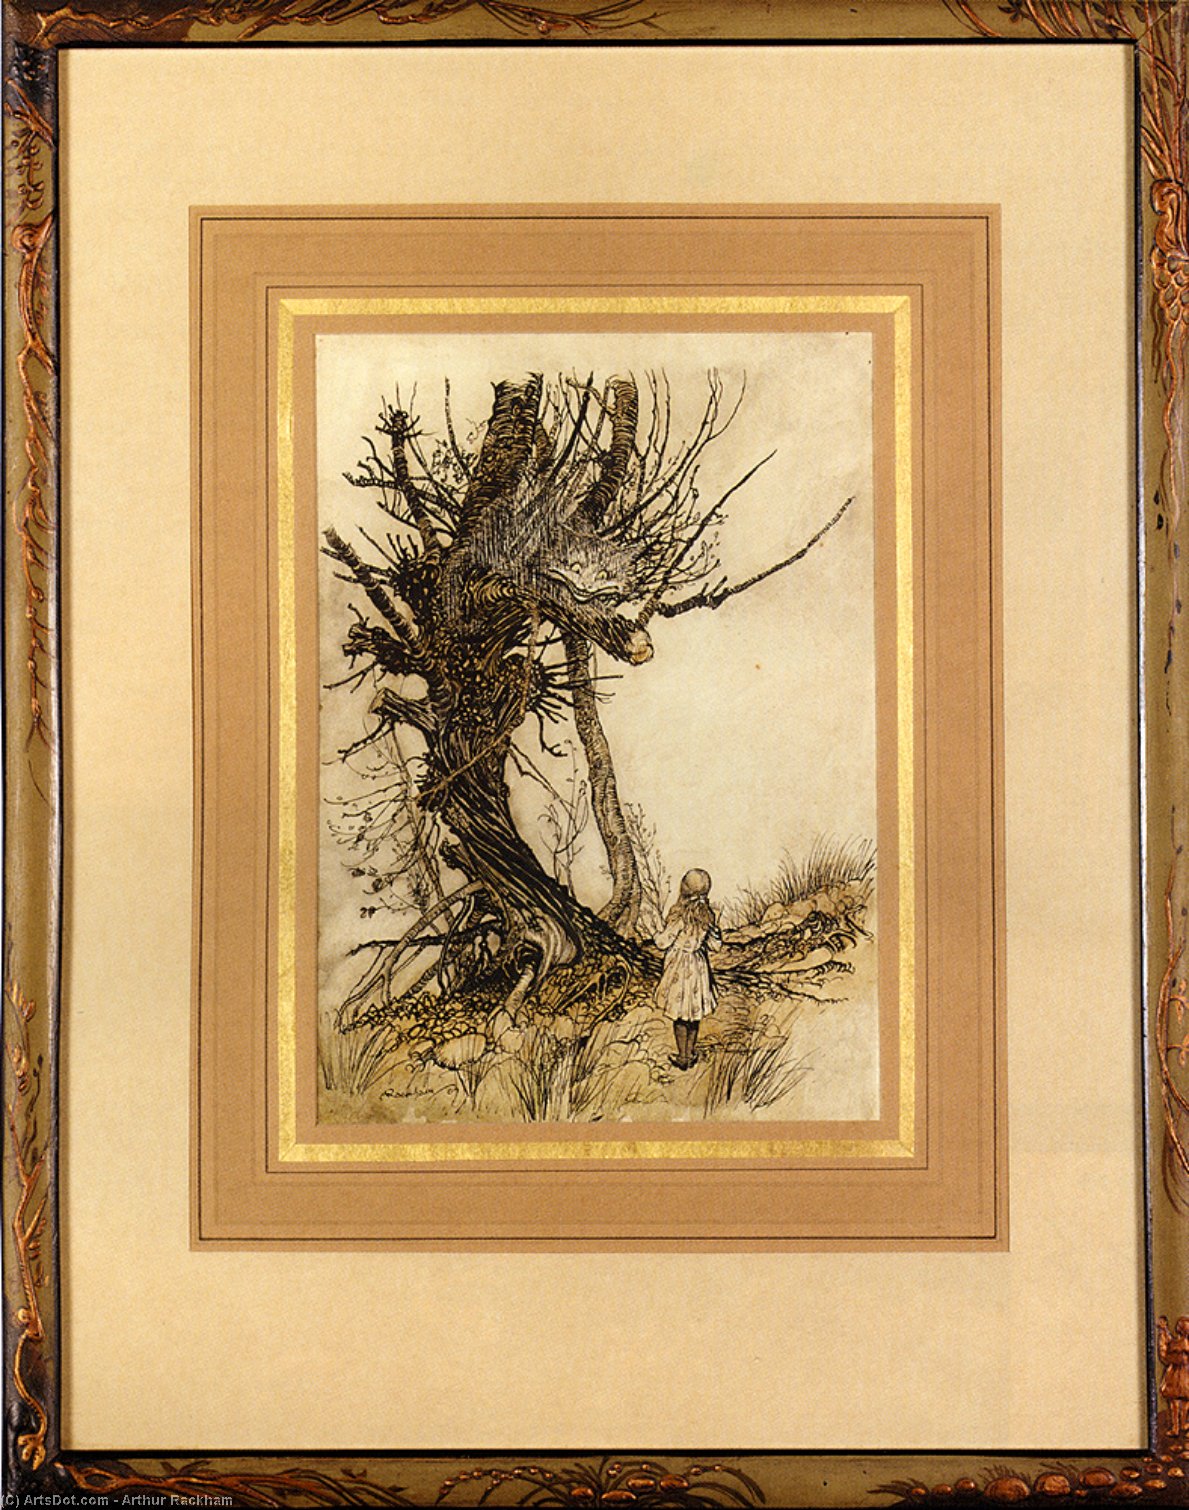 Order Paintings Reproductions Alice In Wonderland. Alice And the Cheshire Cat by Arthur Rackham | ArtsDot.com